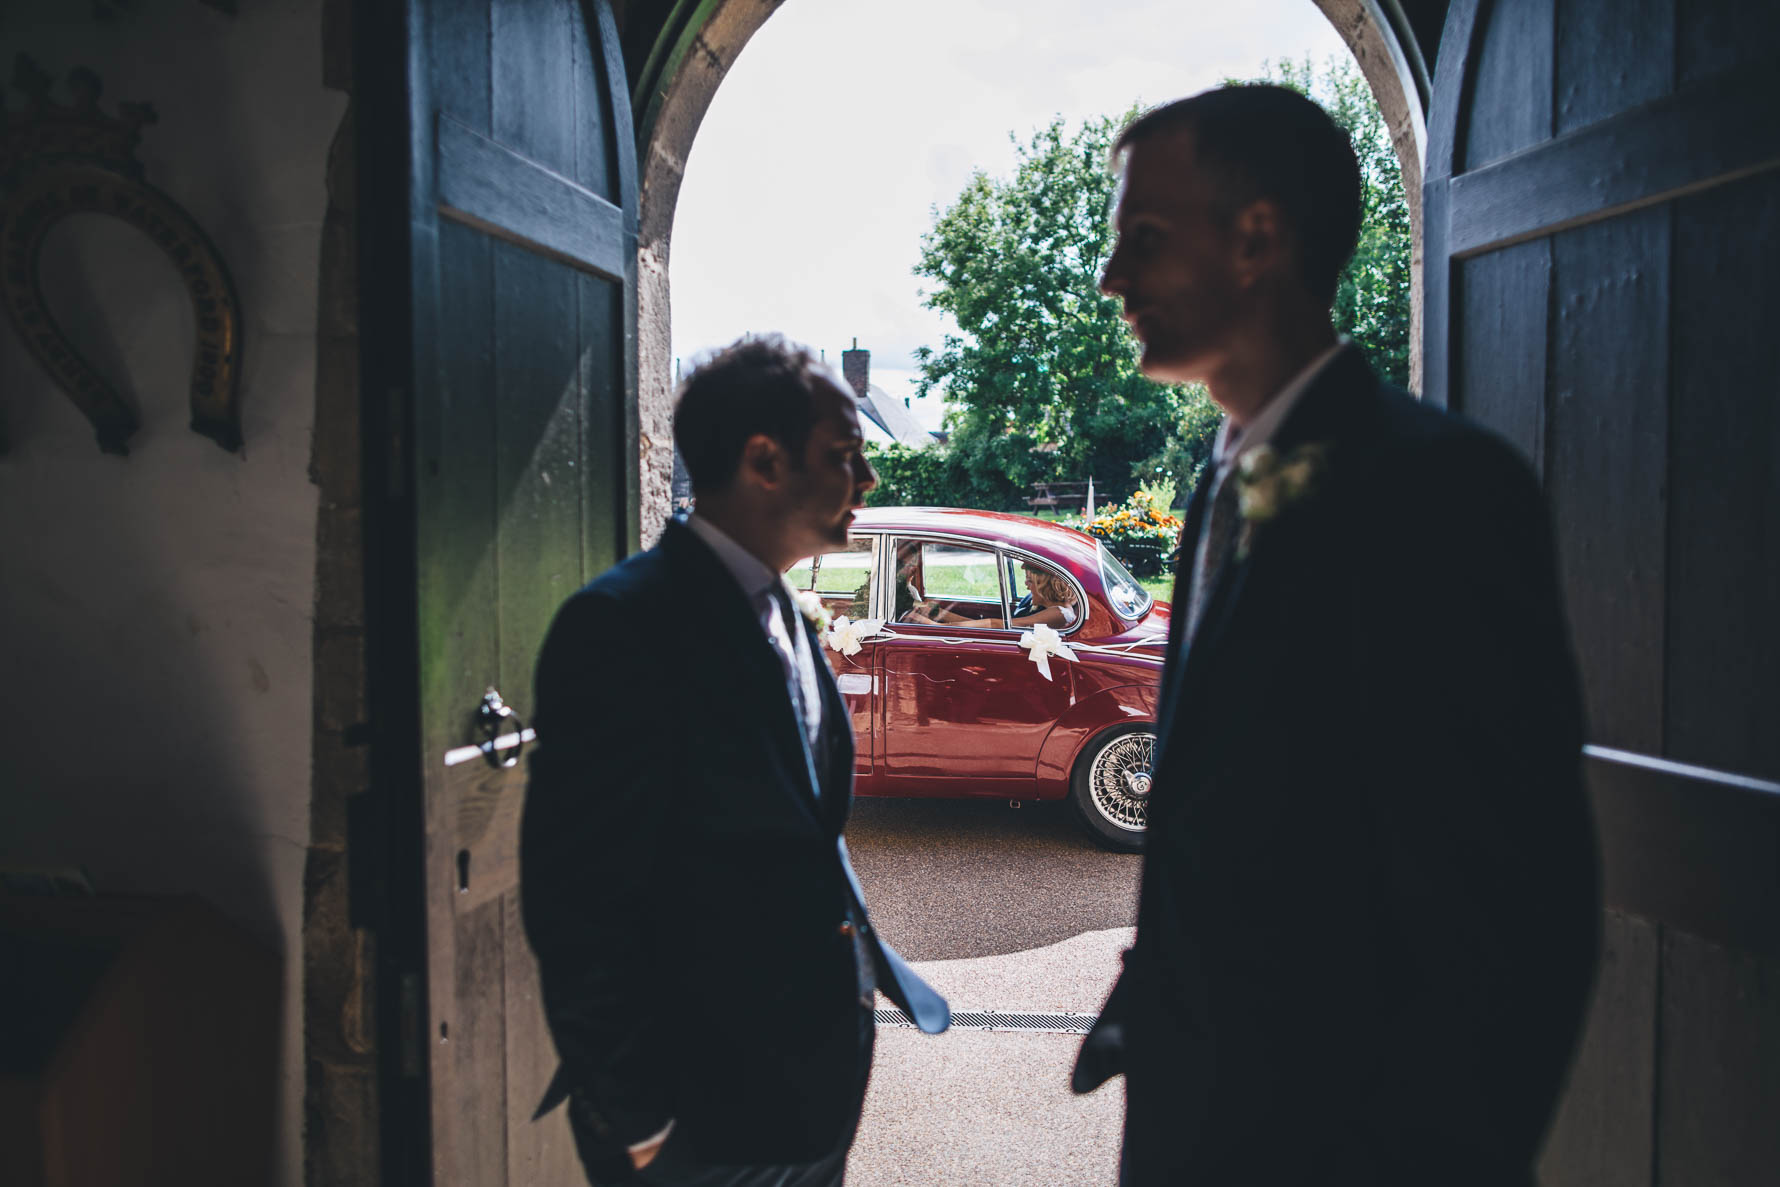 Two groomsmen waiting at the entrance of the Great Hall at Okham Castle as the bride pulls up in a vintage red car along with her father